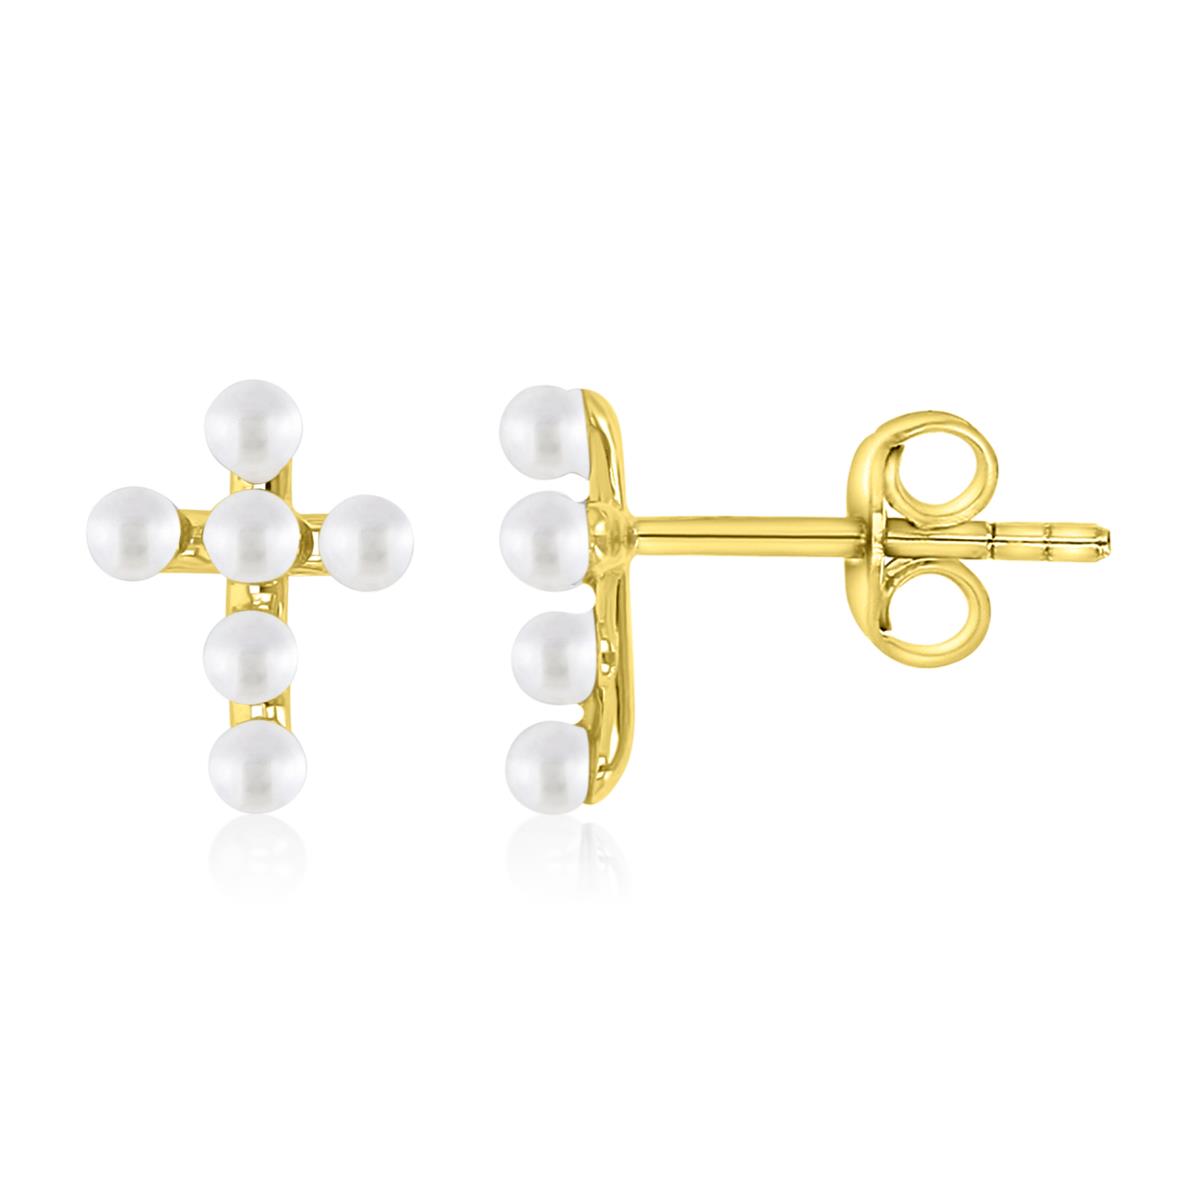 Sterling Silver Yellow 9.5X7MM Polished White Faux Pearl Cross Stud Earrings